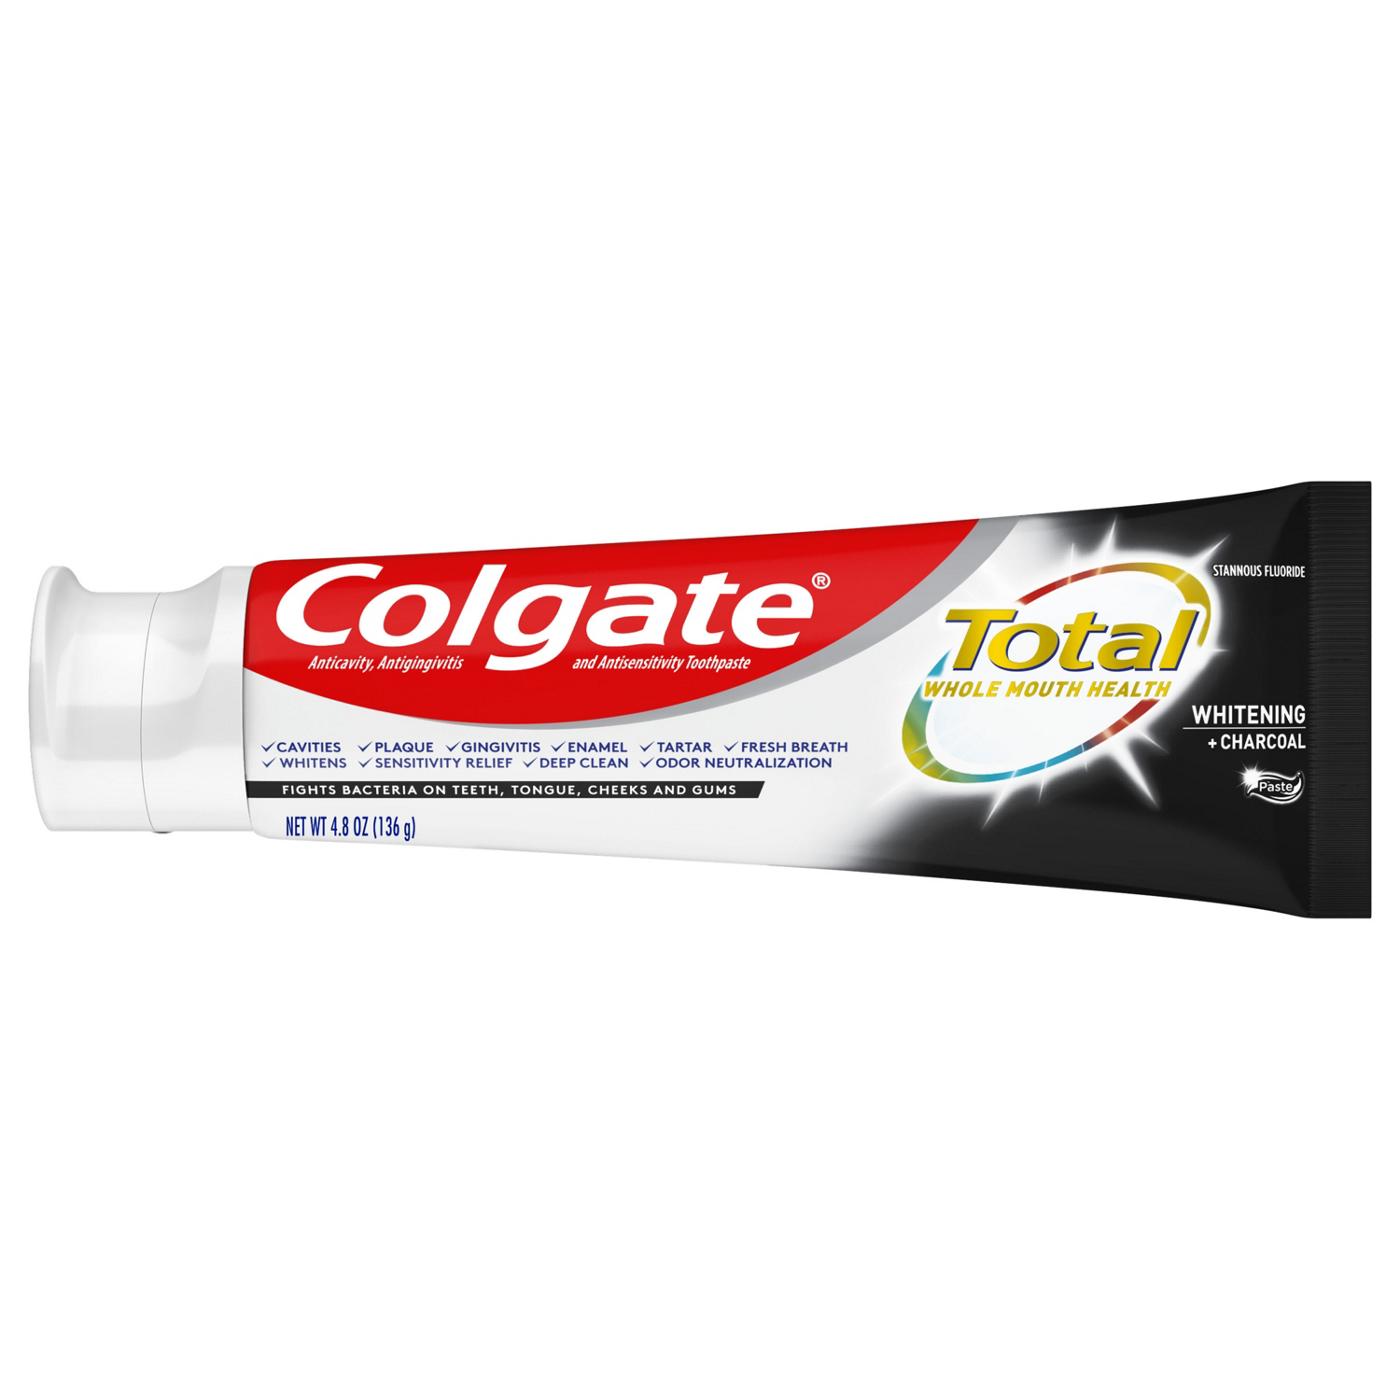 Colgate Total Whitening + Charcoal Toothpaste; image 6 of 12